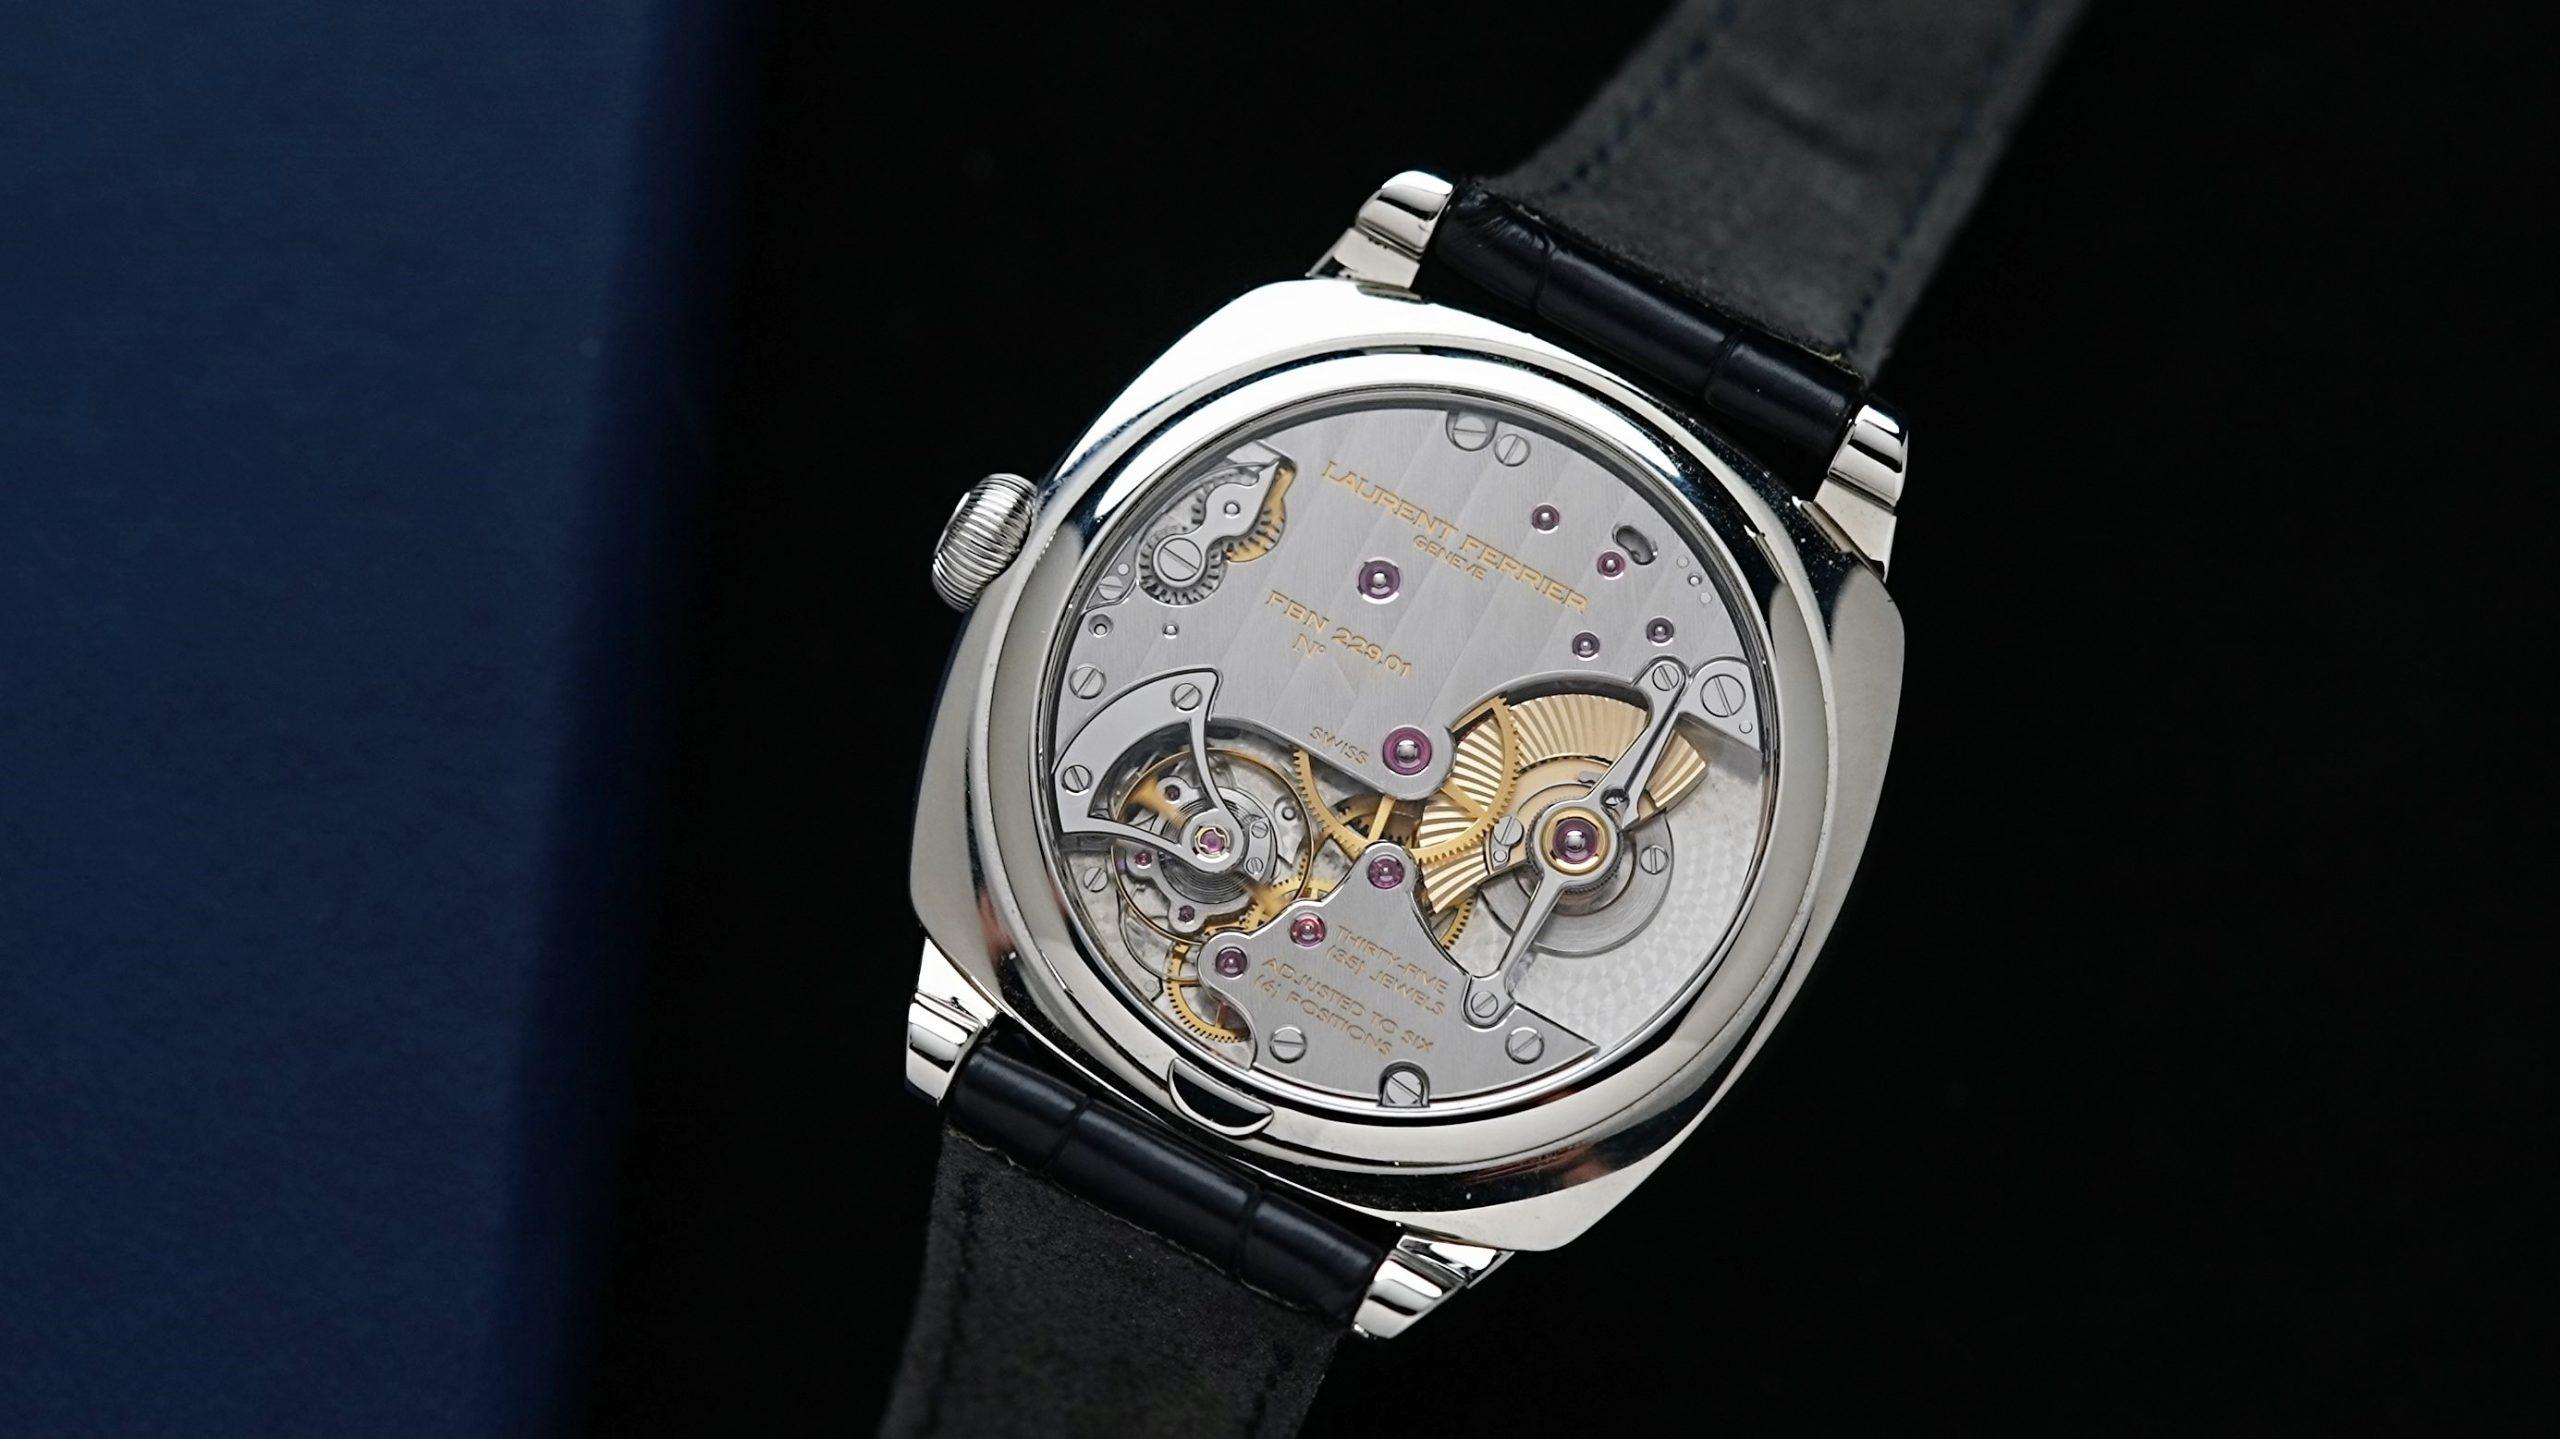 the back side of the Laurent Ferrier MICRO-ROTOR GALET SQUARE.